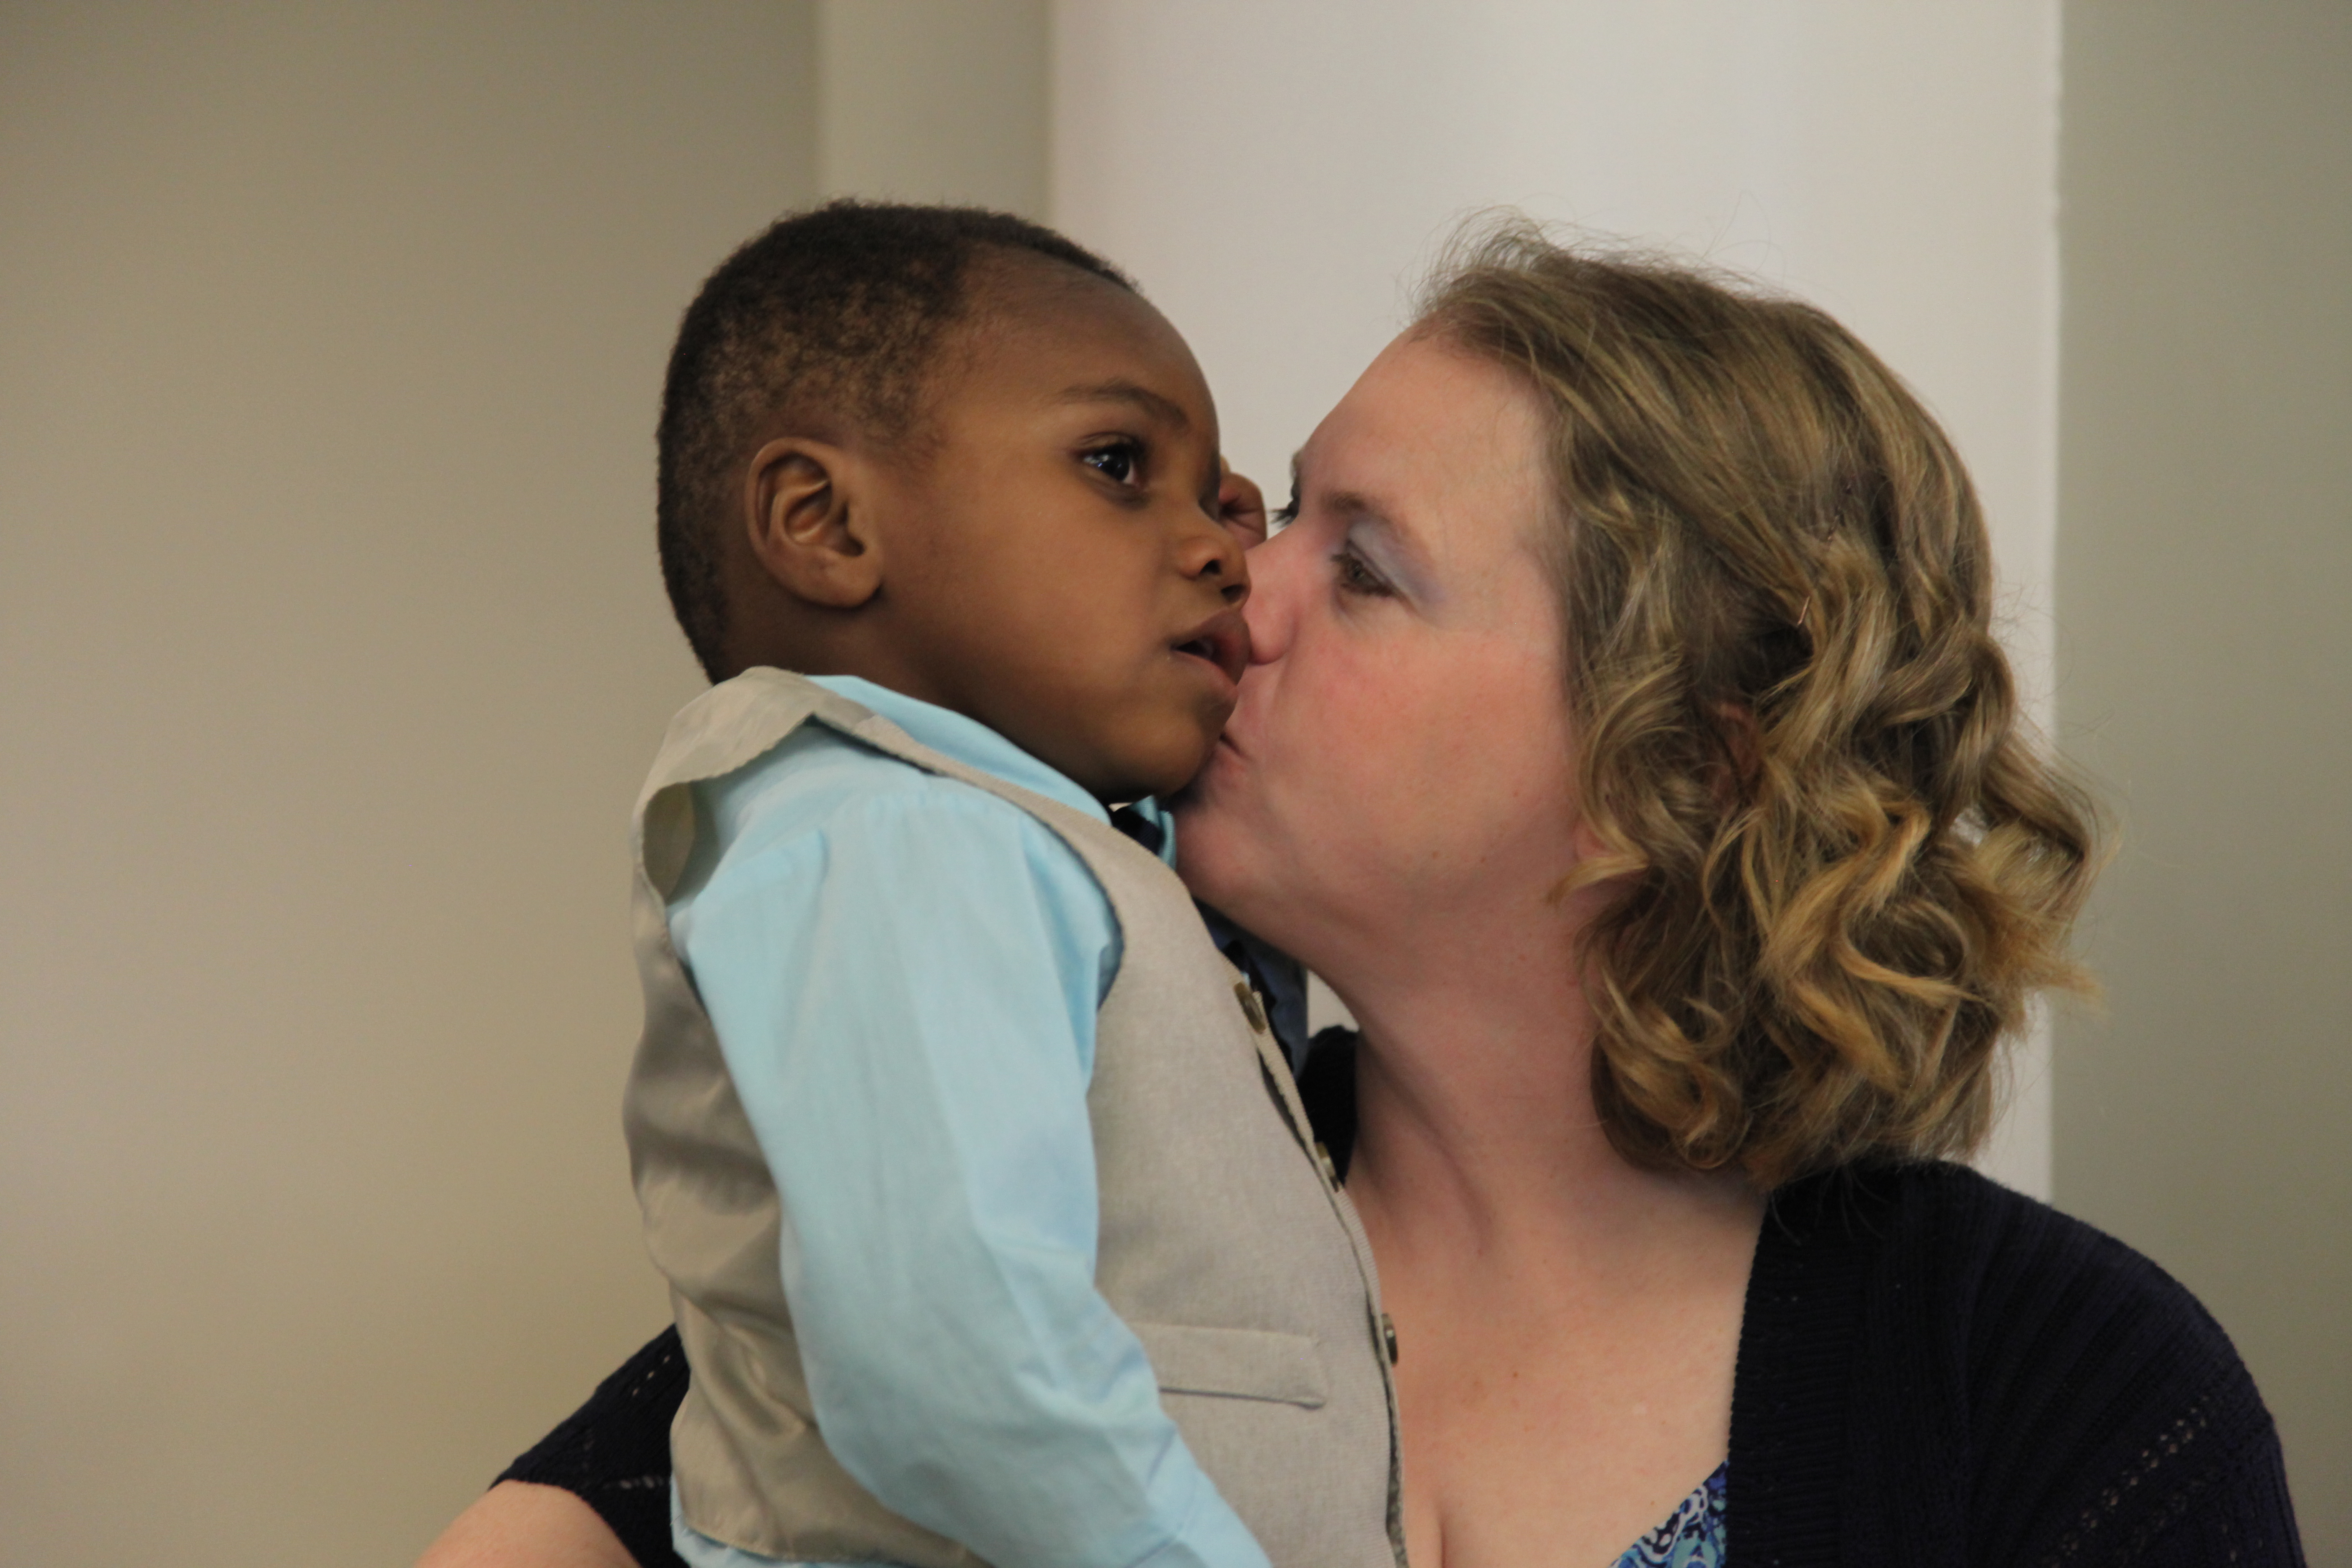 A white woman kisses the cheek of a young black boy she is holding. The boy is wearing a suit vest and a blue shirt.